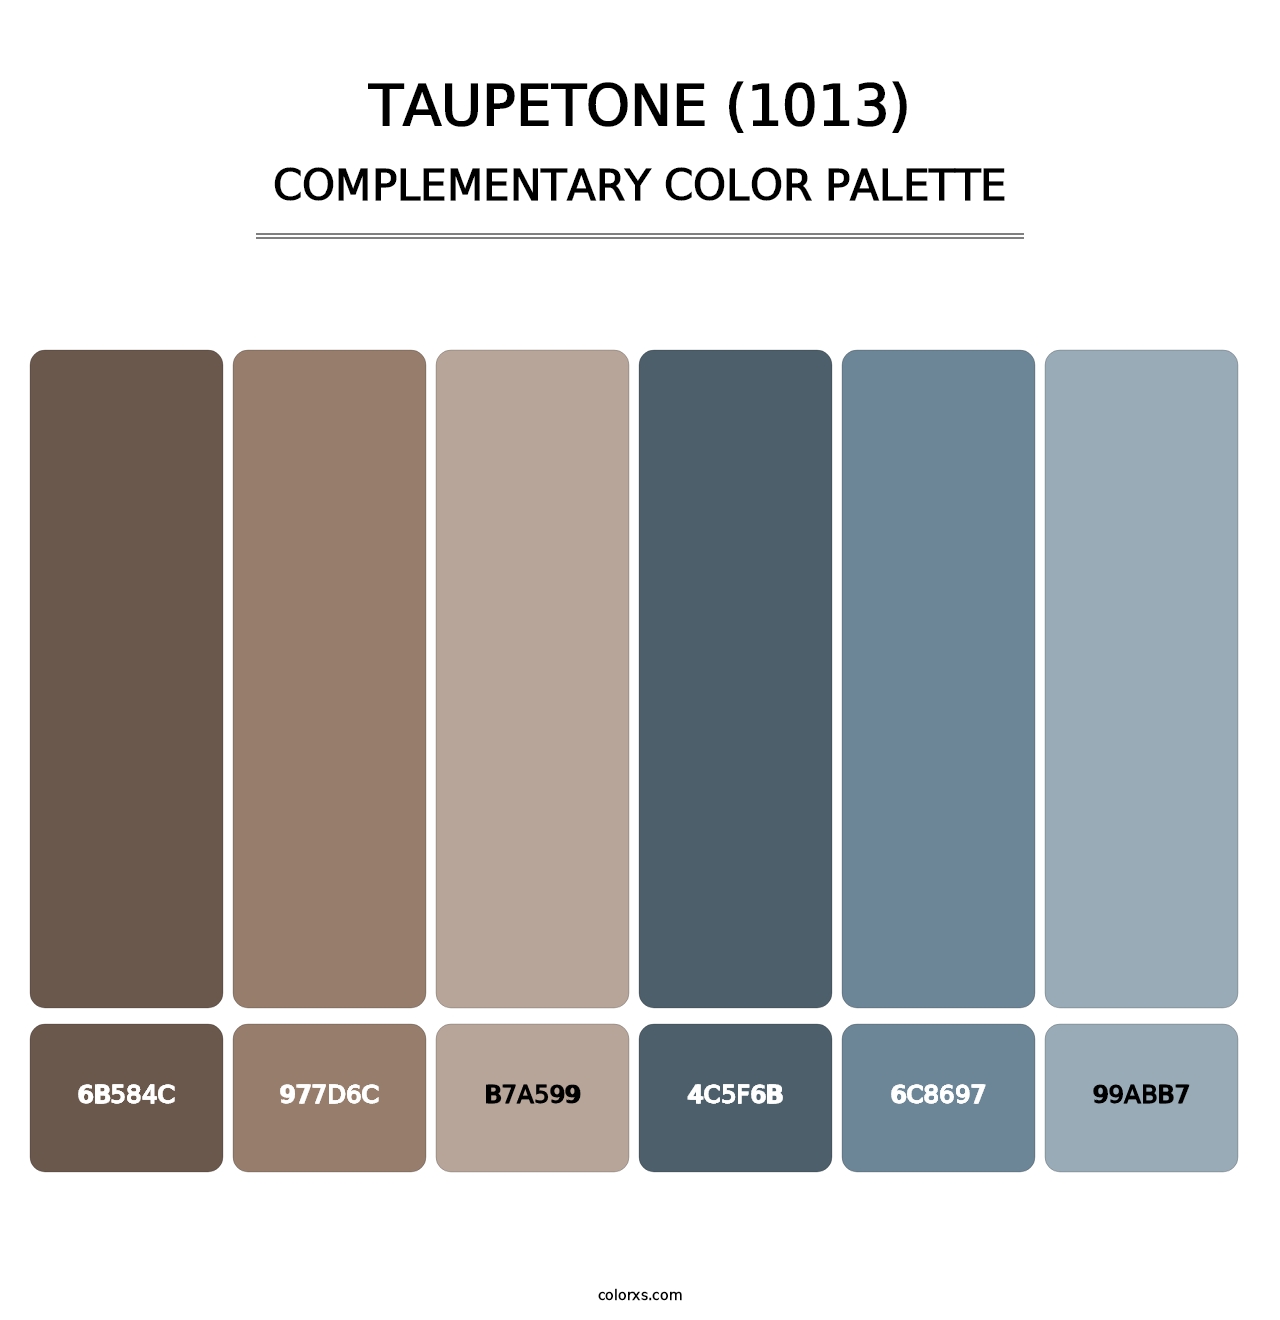 Taupetone (1013) - Complementary Color Palette